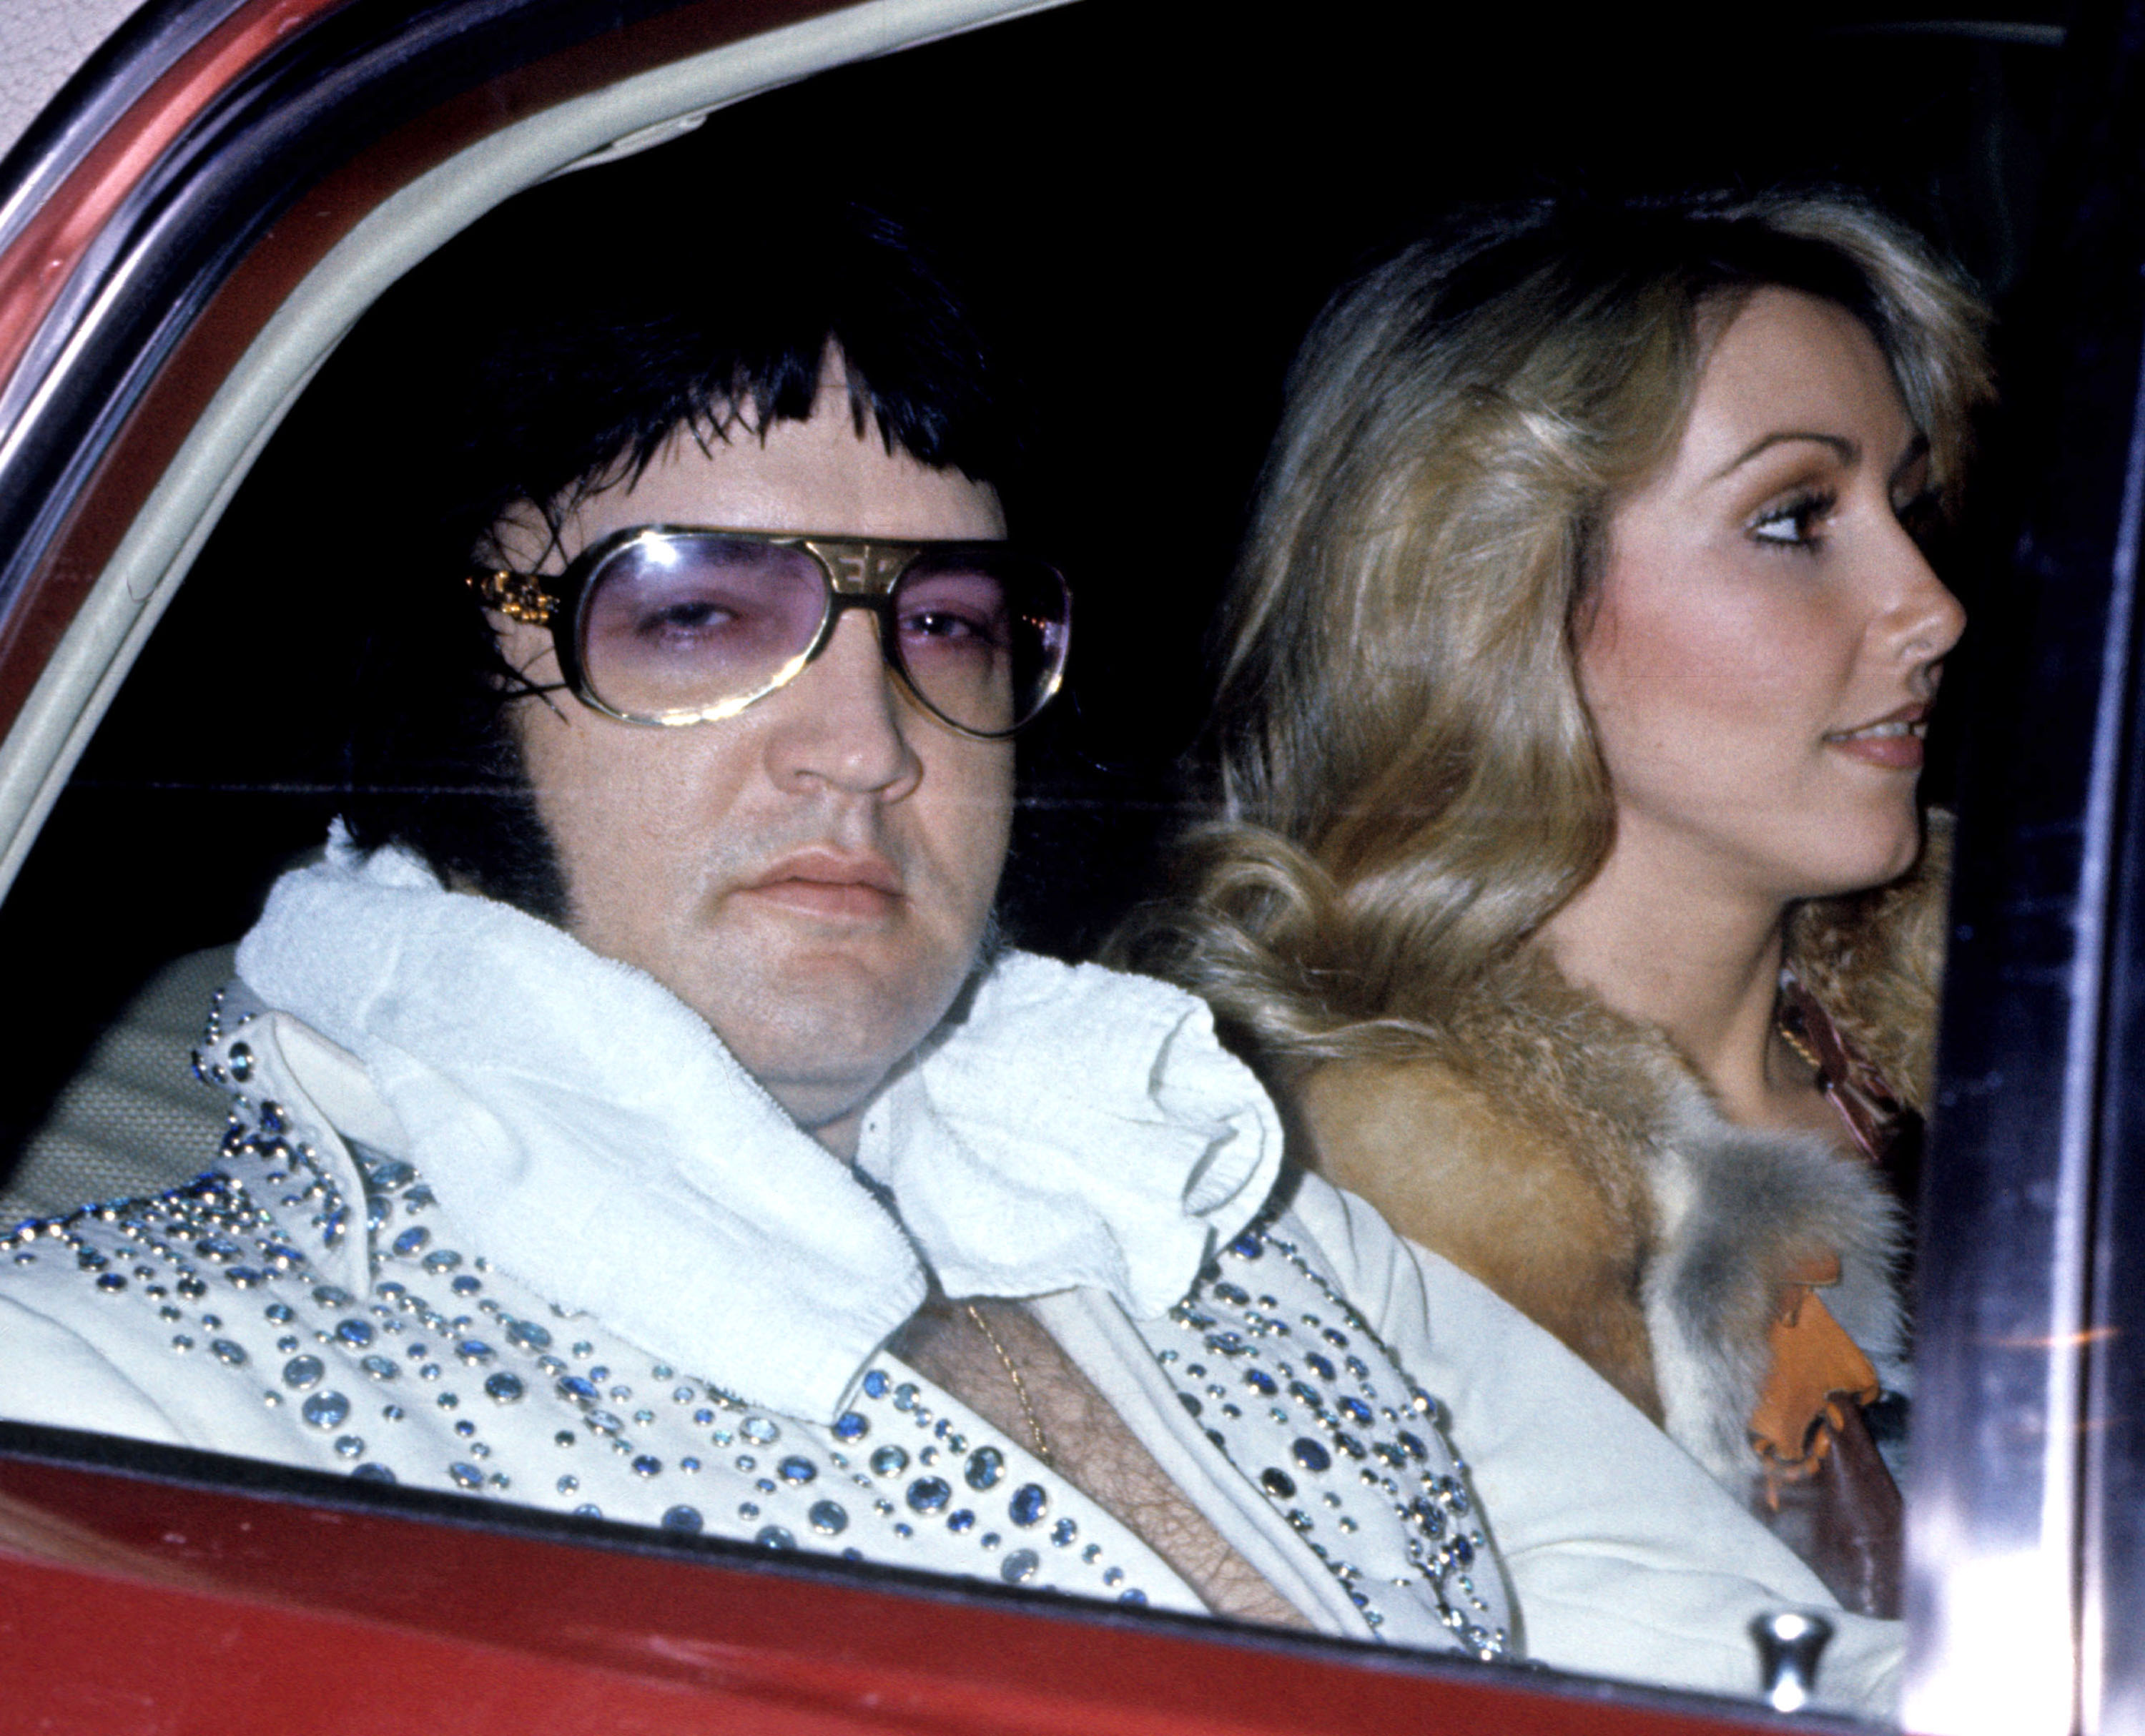 Elvis Presley and Linda Thompson at the Hilton Hotel in Cincinnati, Ohio in 1976 | Source: Getty Images